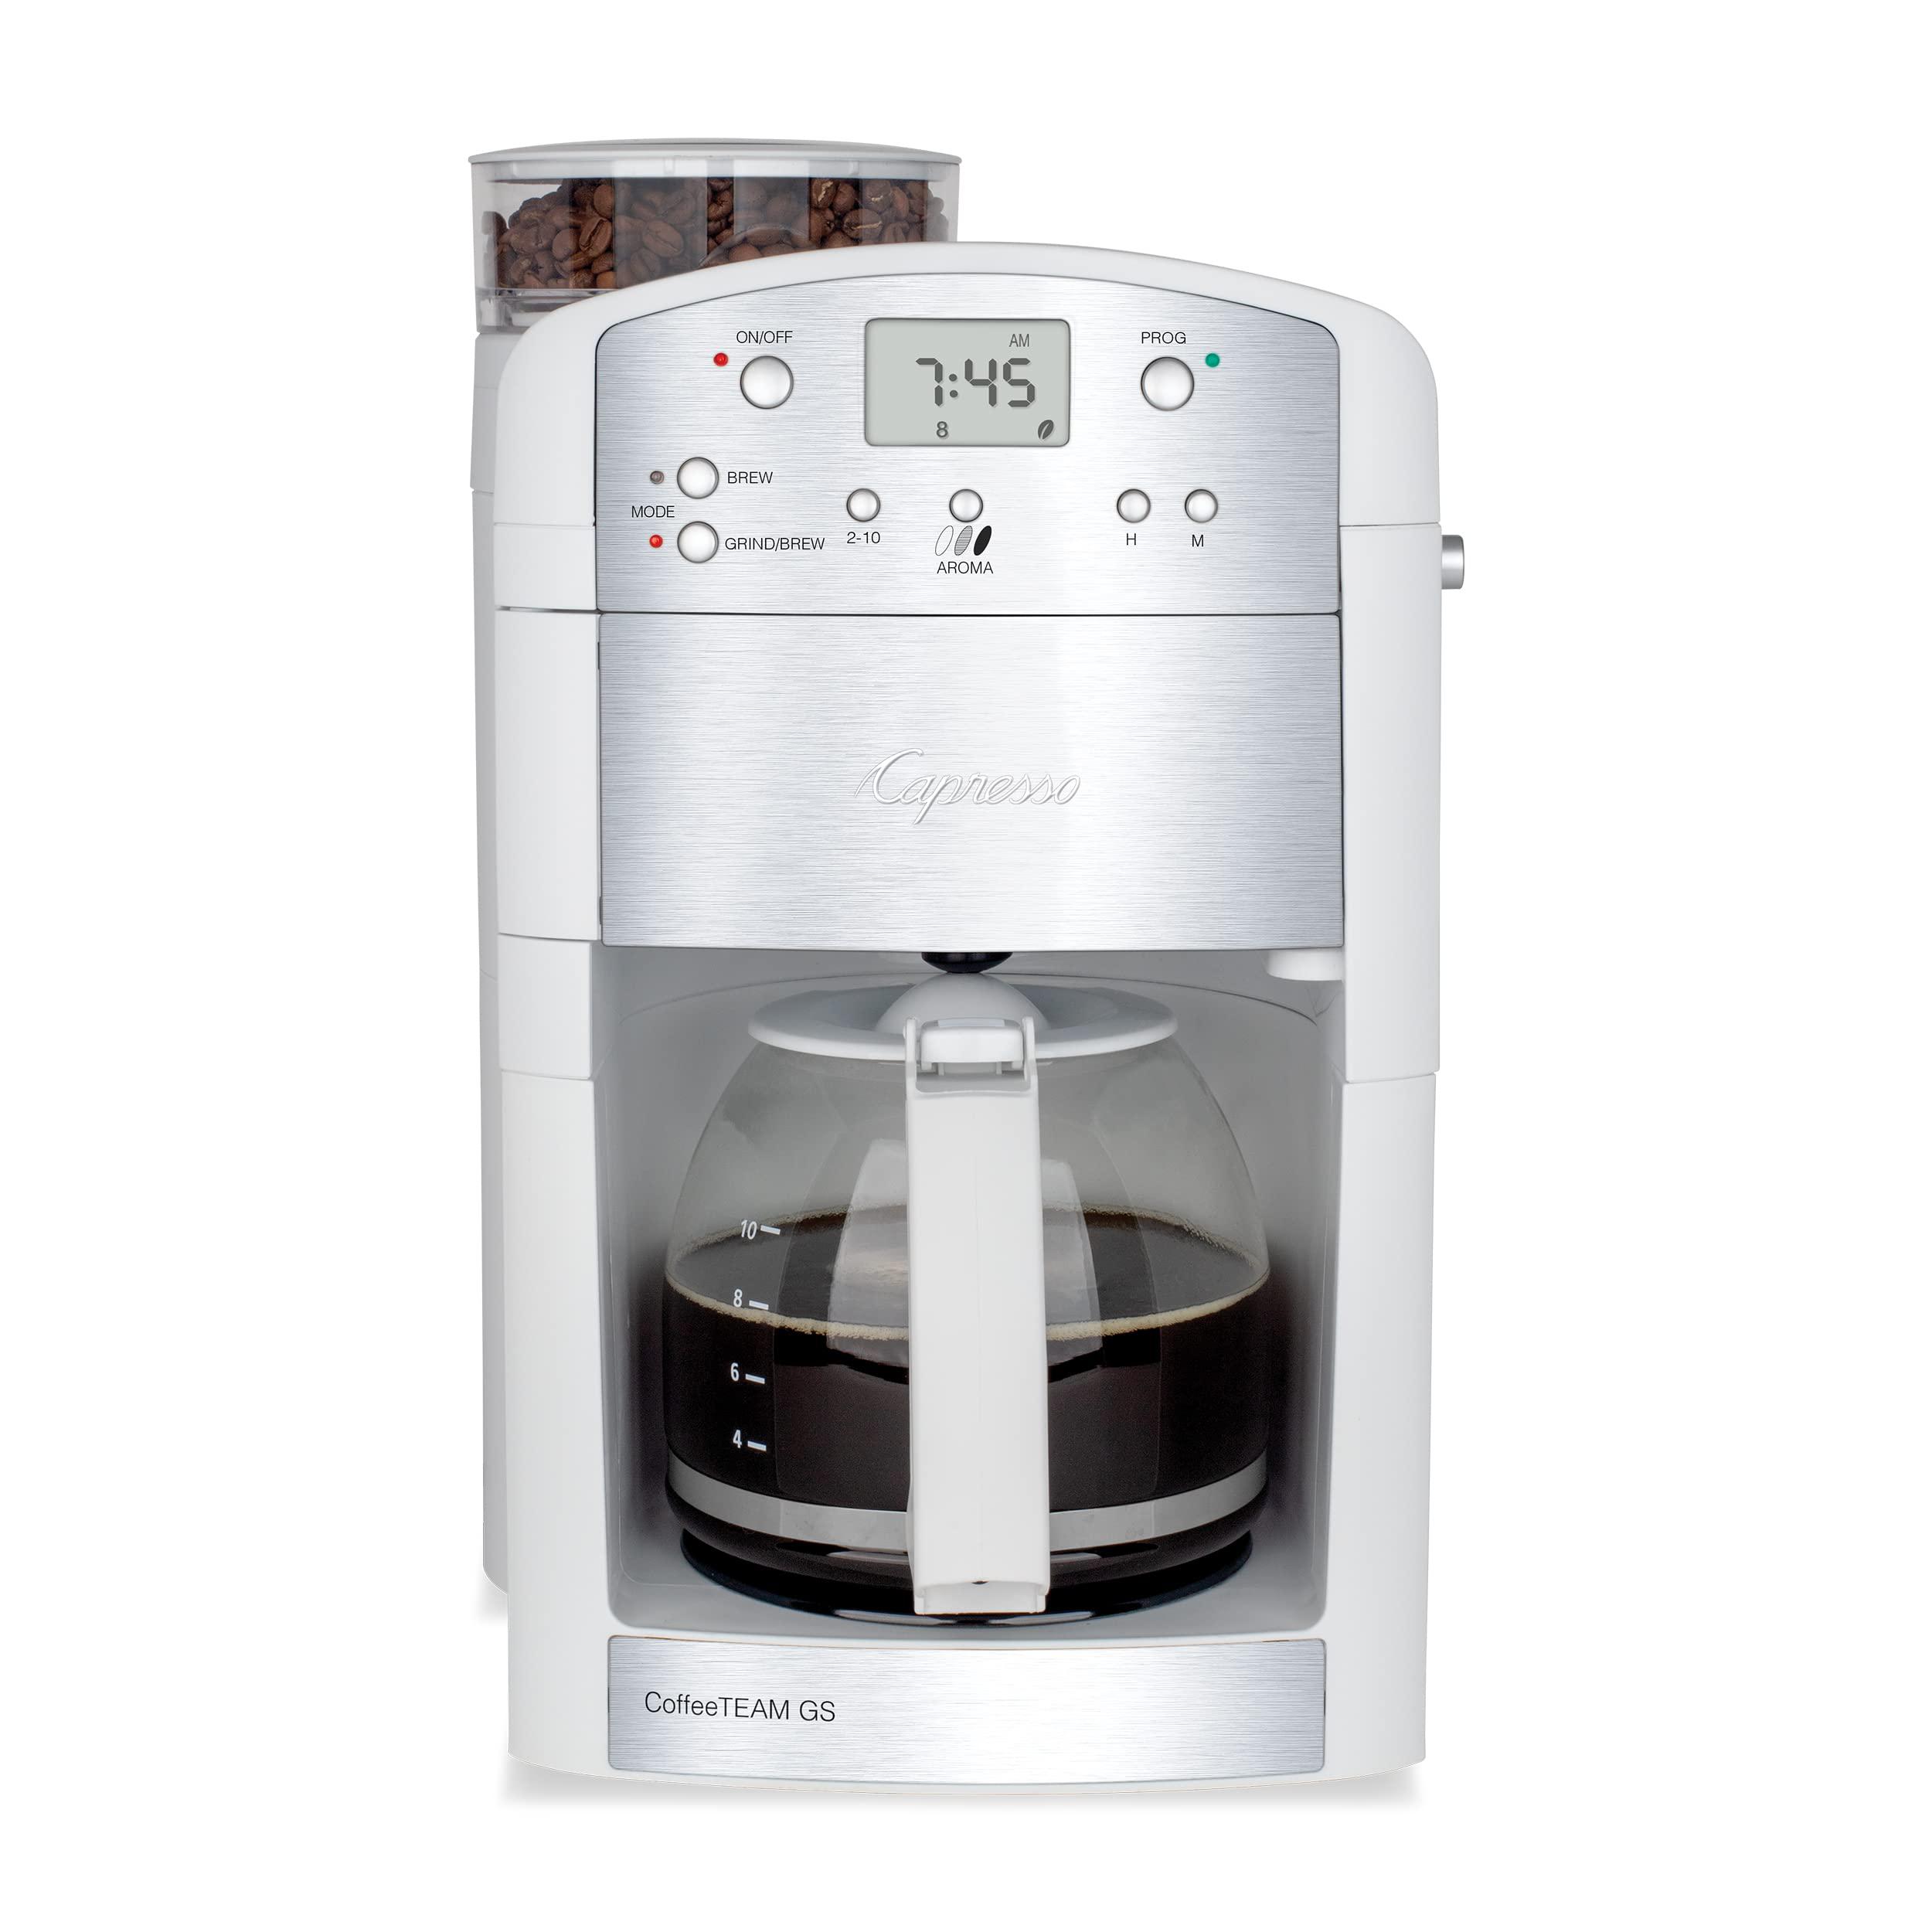 capresso coffeeteam gs 10-cup coffee maker with conical burr grinder, glass carafe 464.02 white